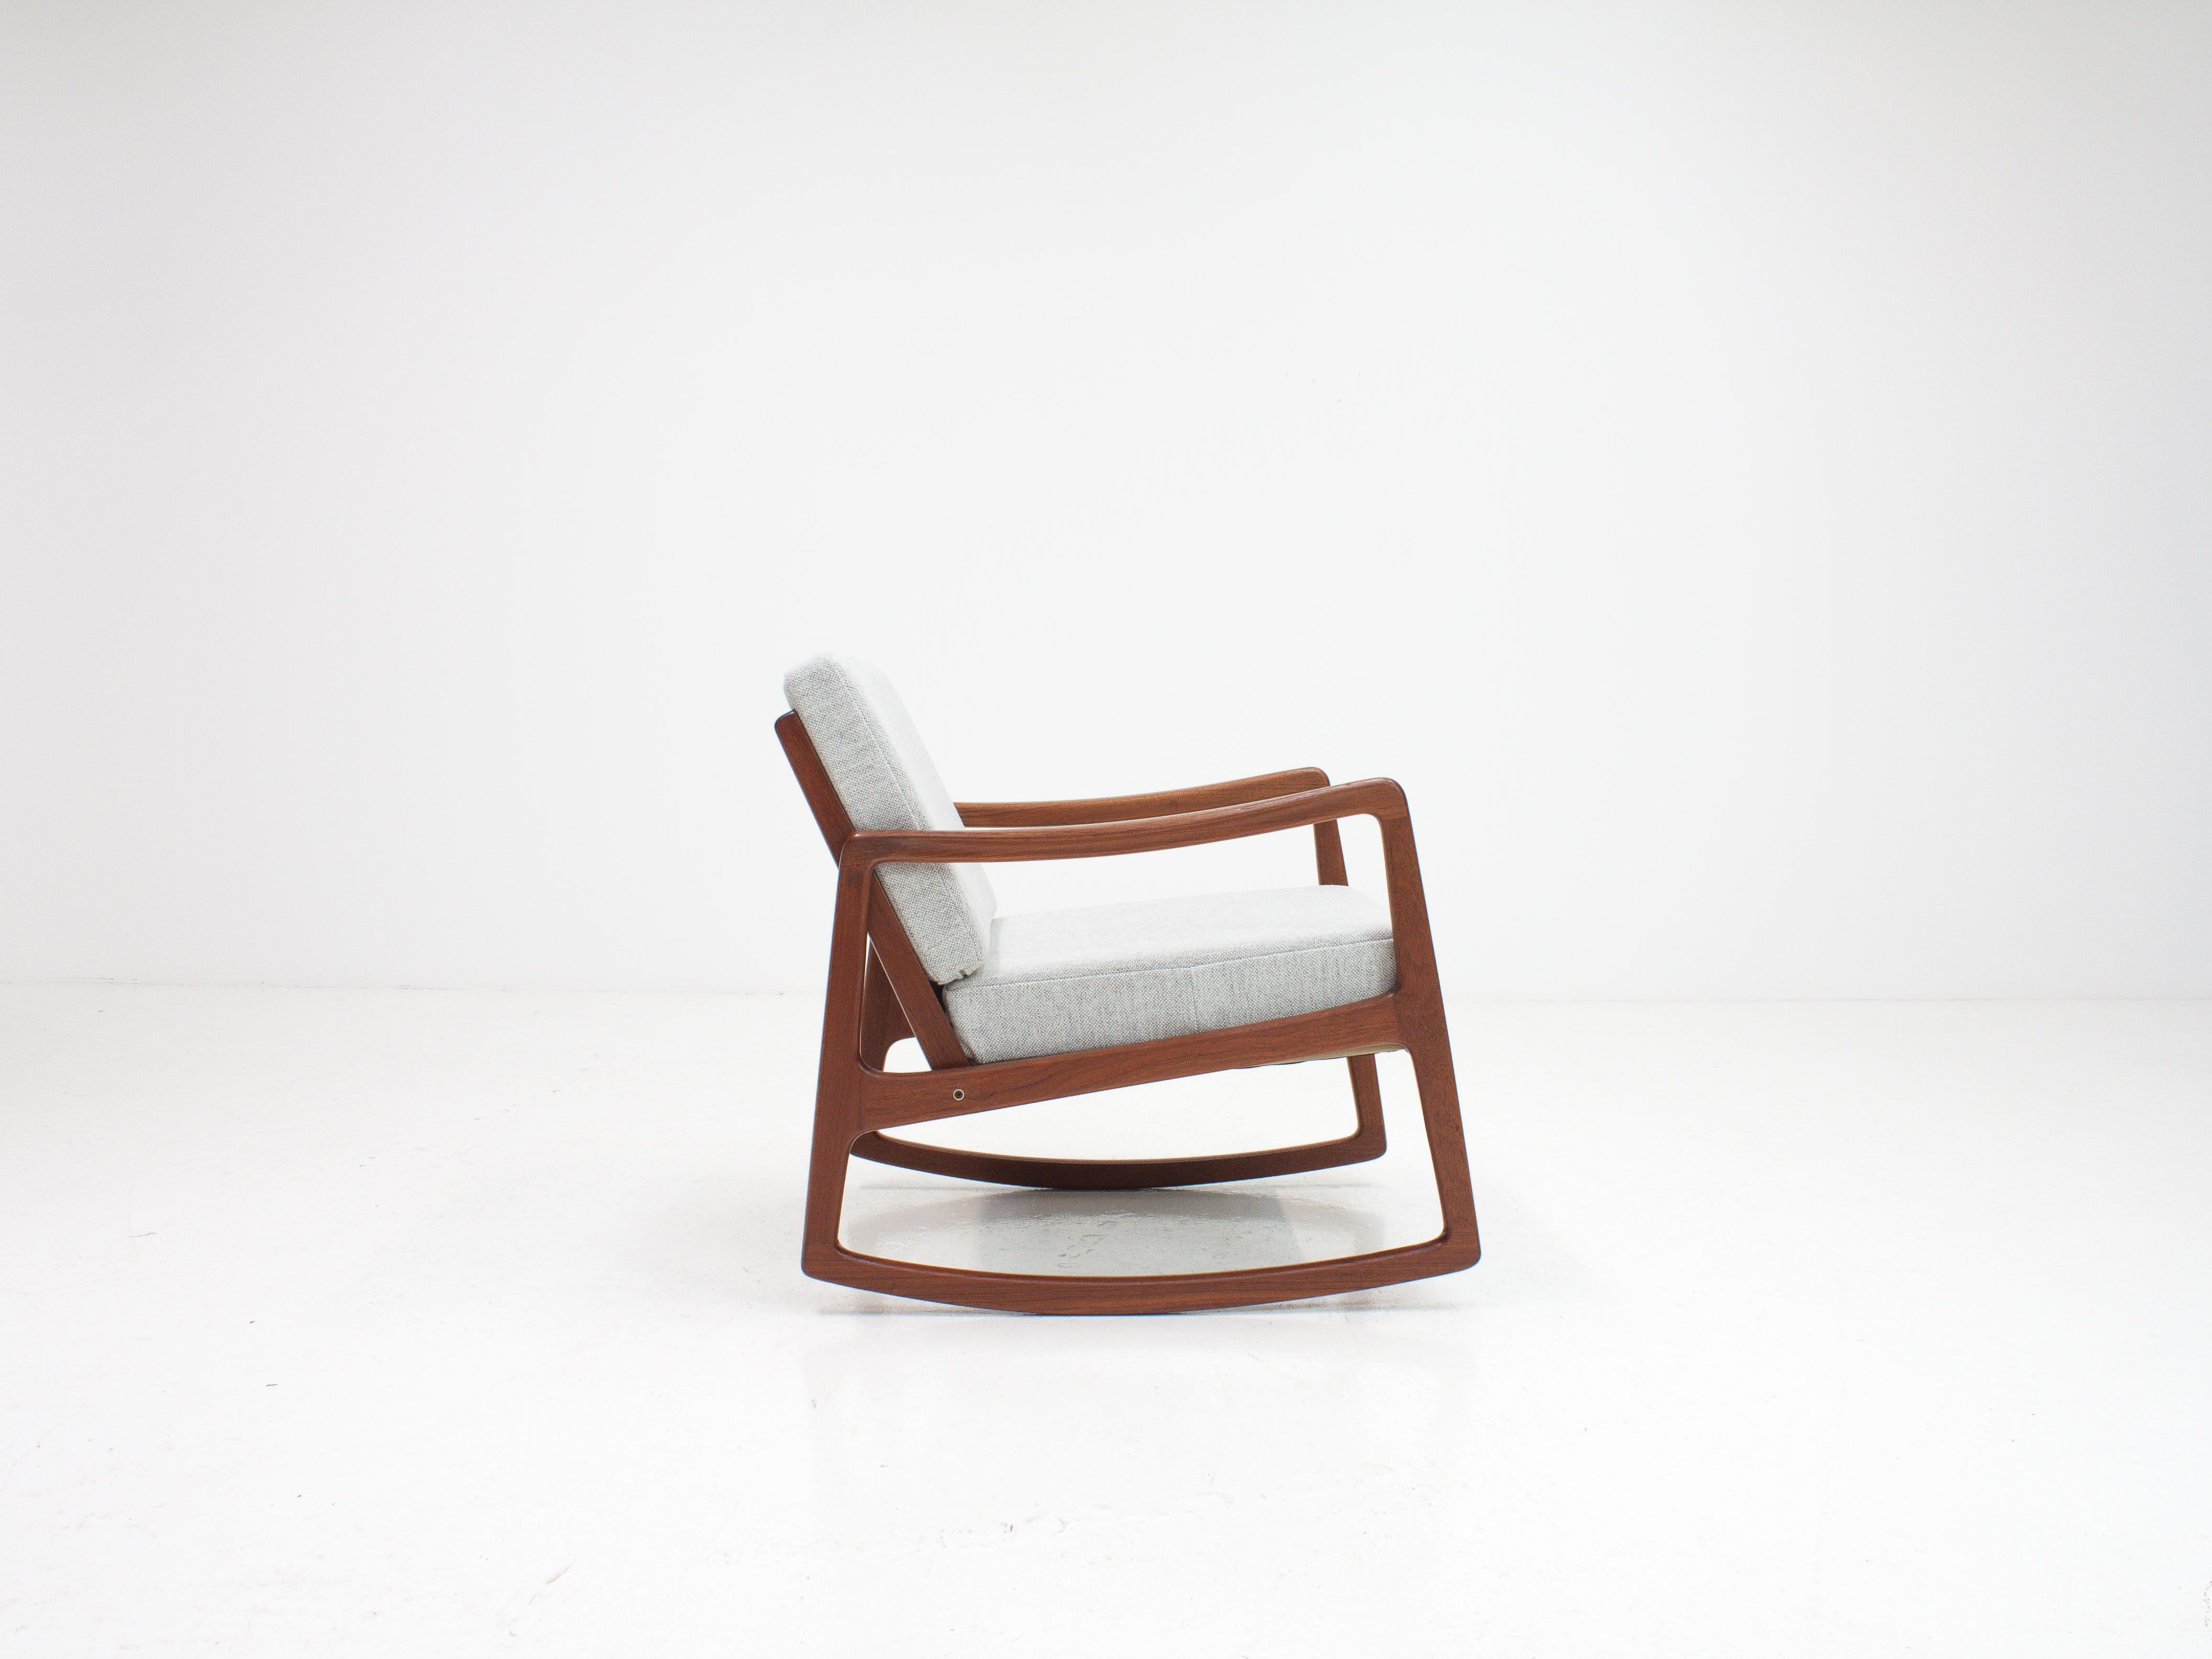 An Ole Wanscher model 120 teak rocking chair for France & Son.

The receiver of a 'Good Design' award from MoMA New York. 

A rare Ole Wanscher design dating from 1952 with an amazing Minimalist look, featuring a low back which gives the piece a